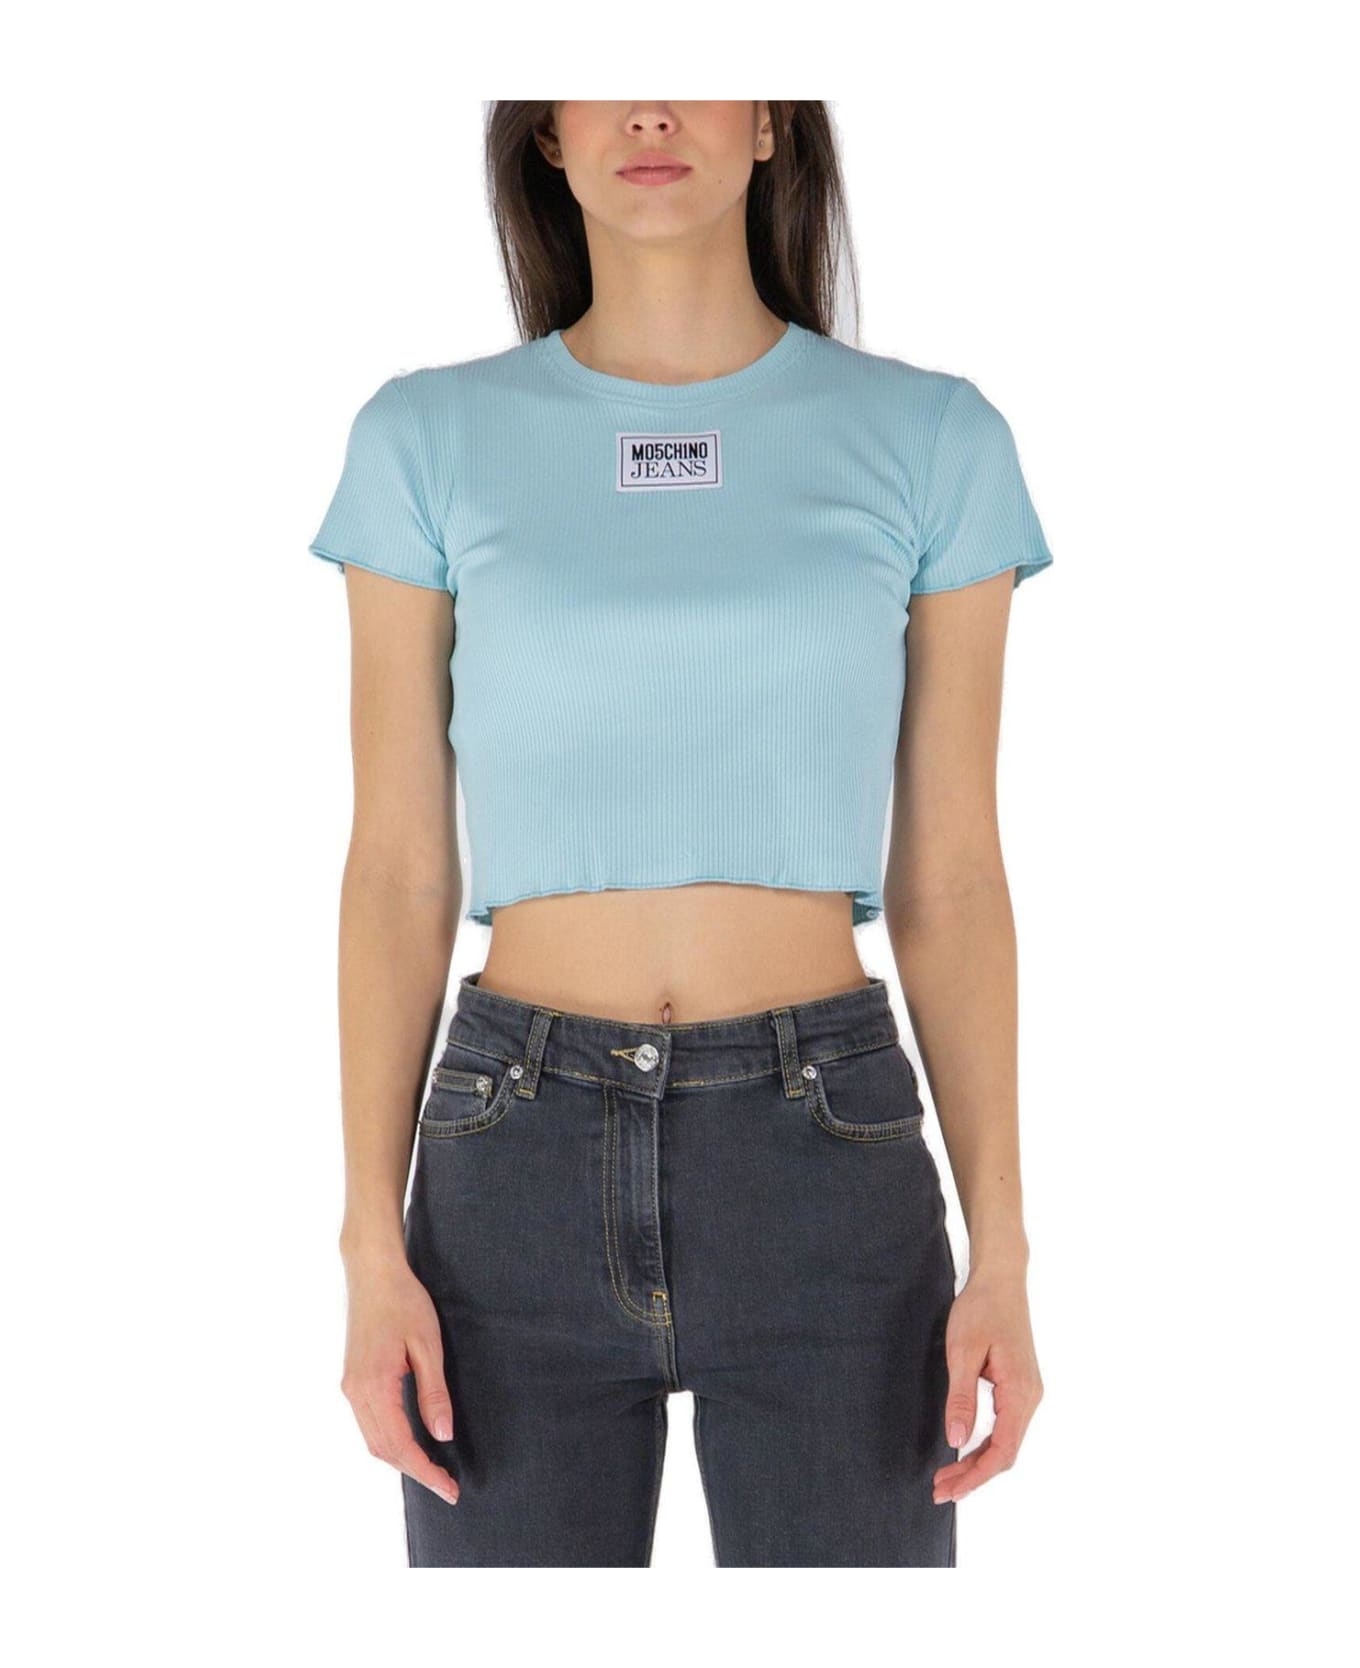 Moschino Jeans Lettuce Hem Cropped T-shirt Tシャツ